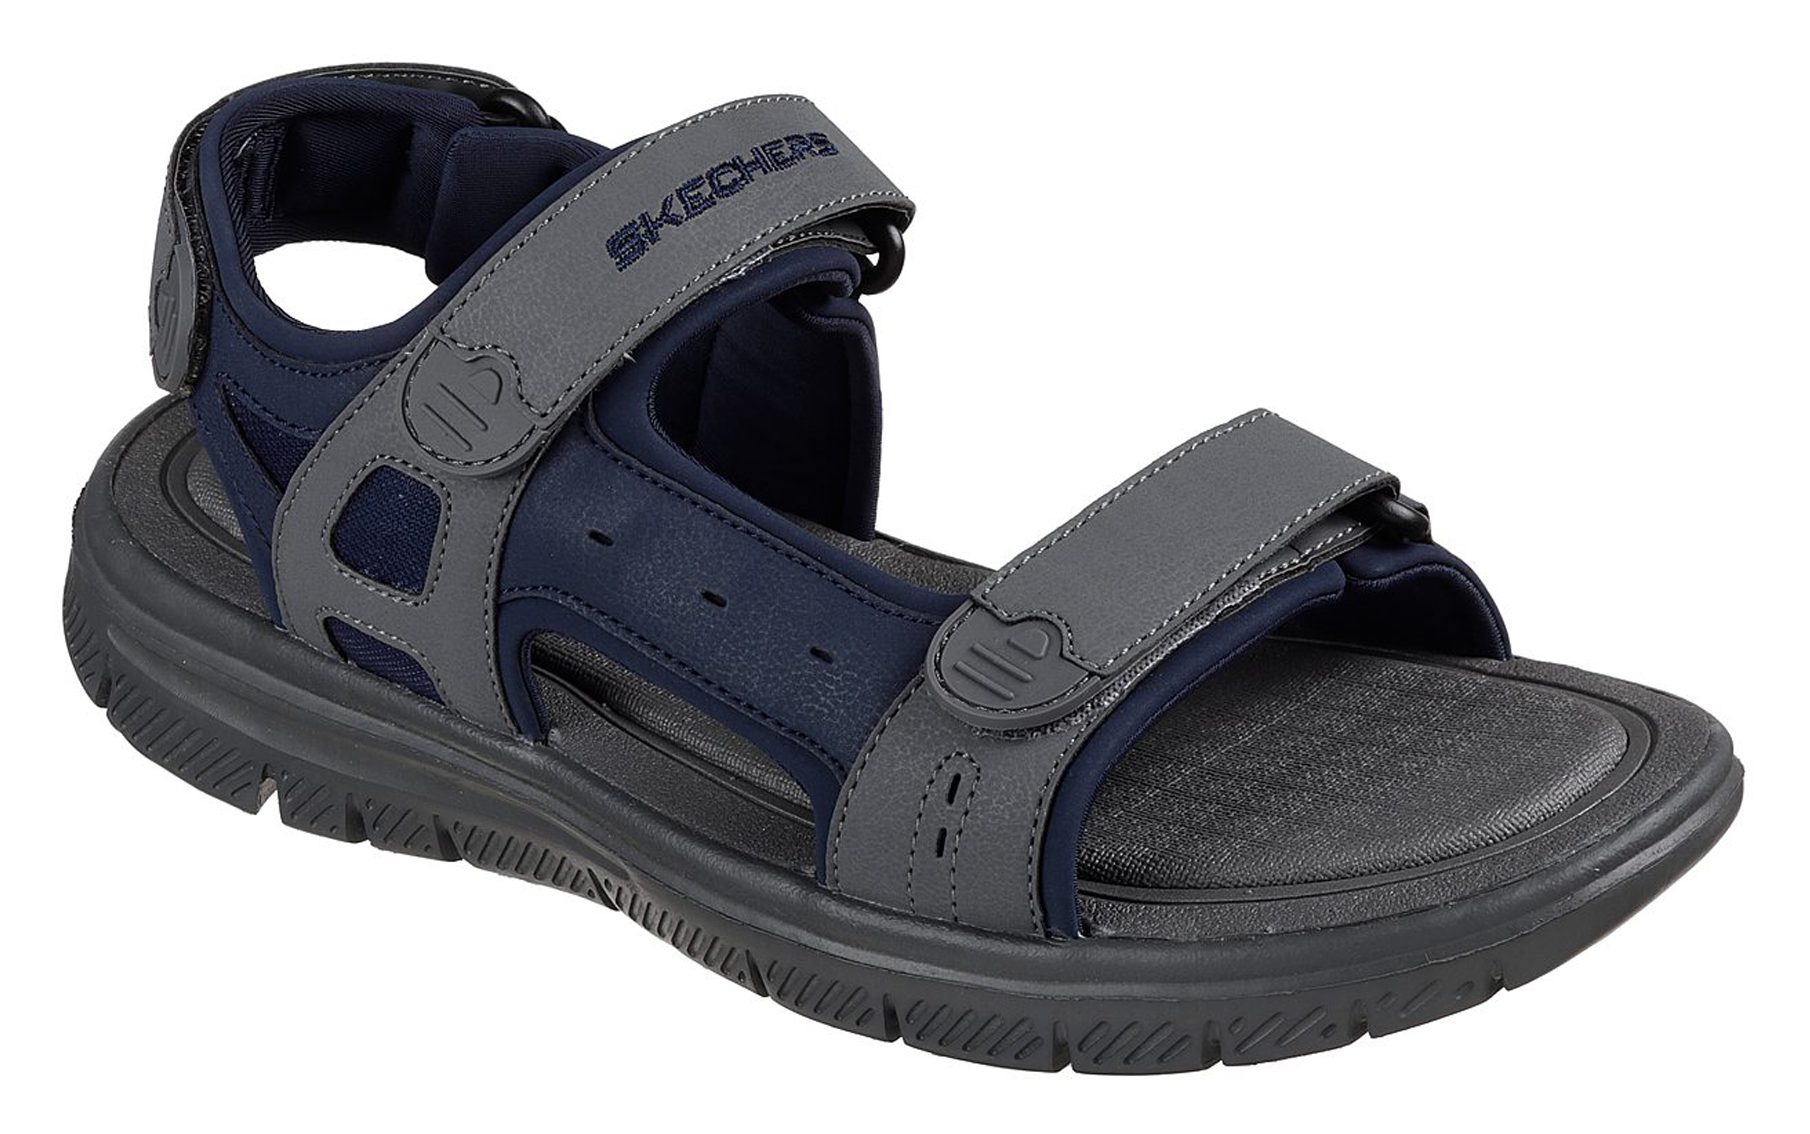 Skechers Flex Advantage S - - Navy Full 51874 Charcoal Humphries Shoes - NVCC Sandals / Upwell